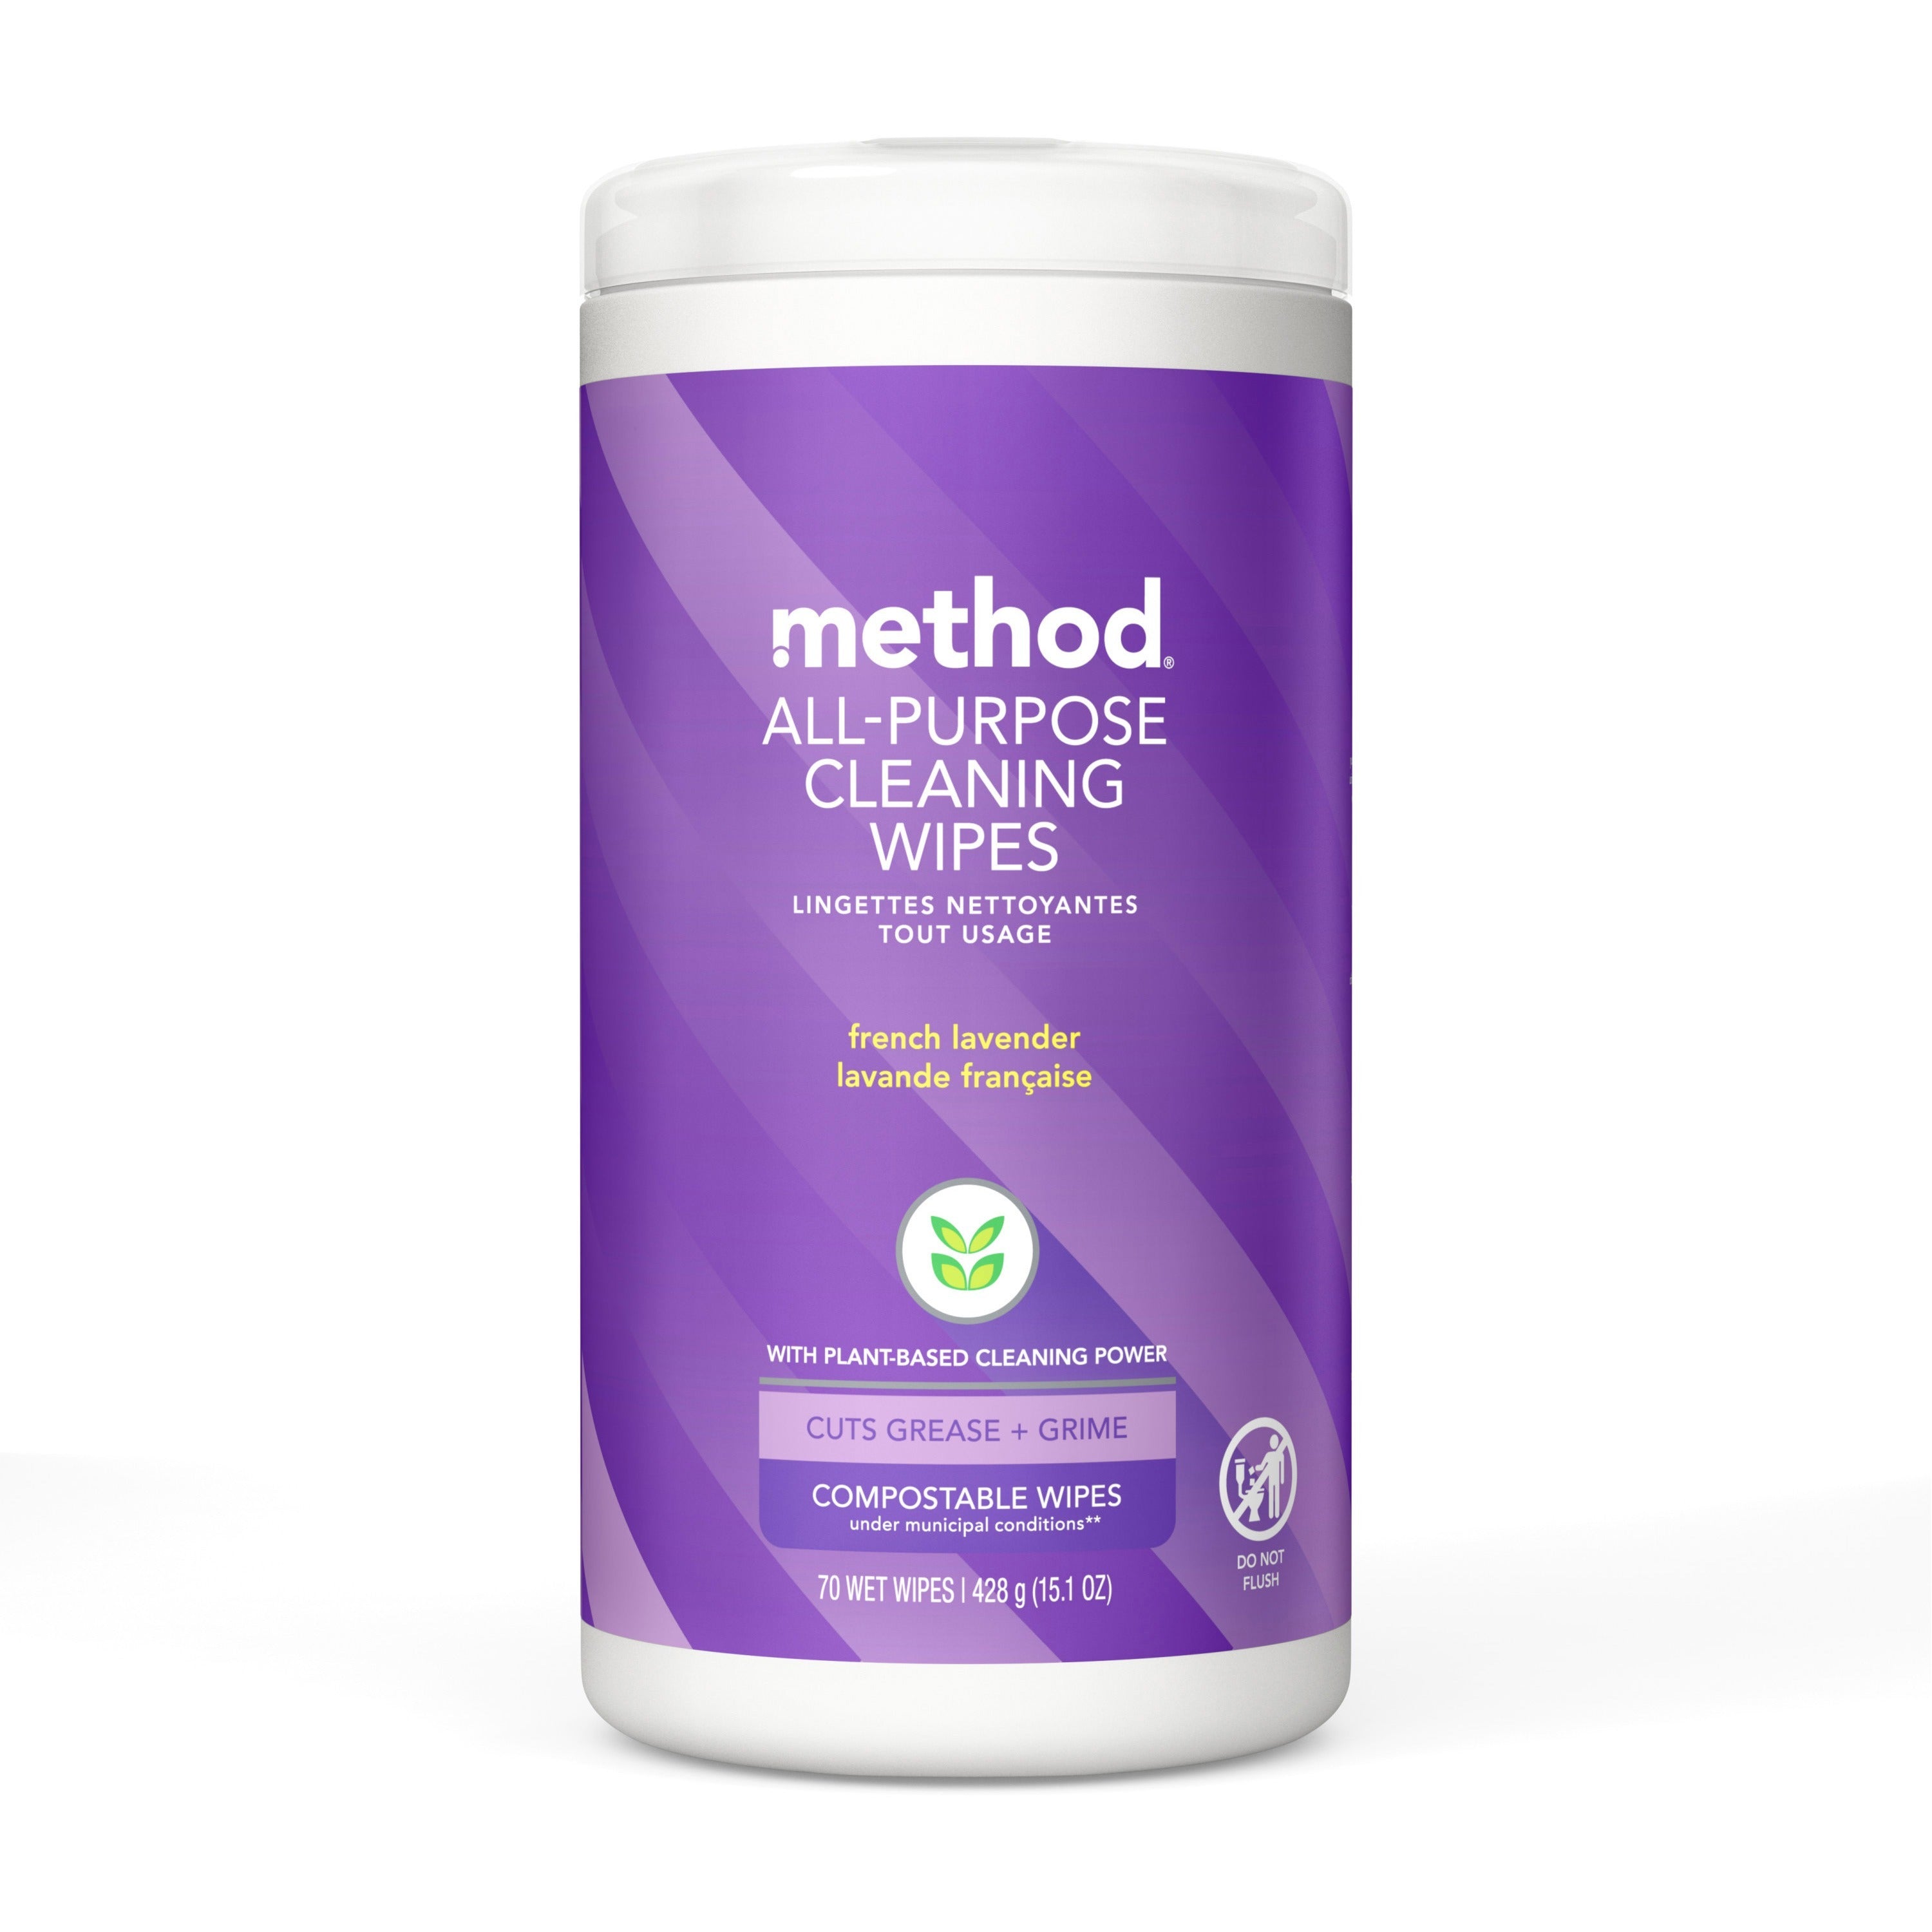 method-all-purpose-cleaning-wipes-french-lavender-scent-70-tub-1-each-pleasant-scent-purple_mth338520 - 1